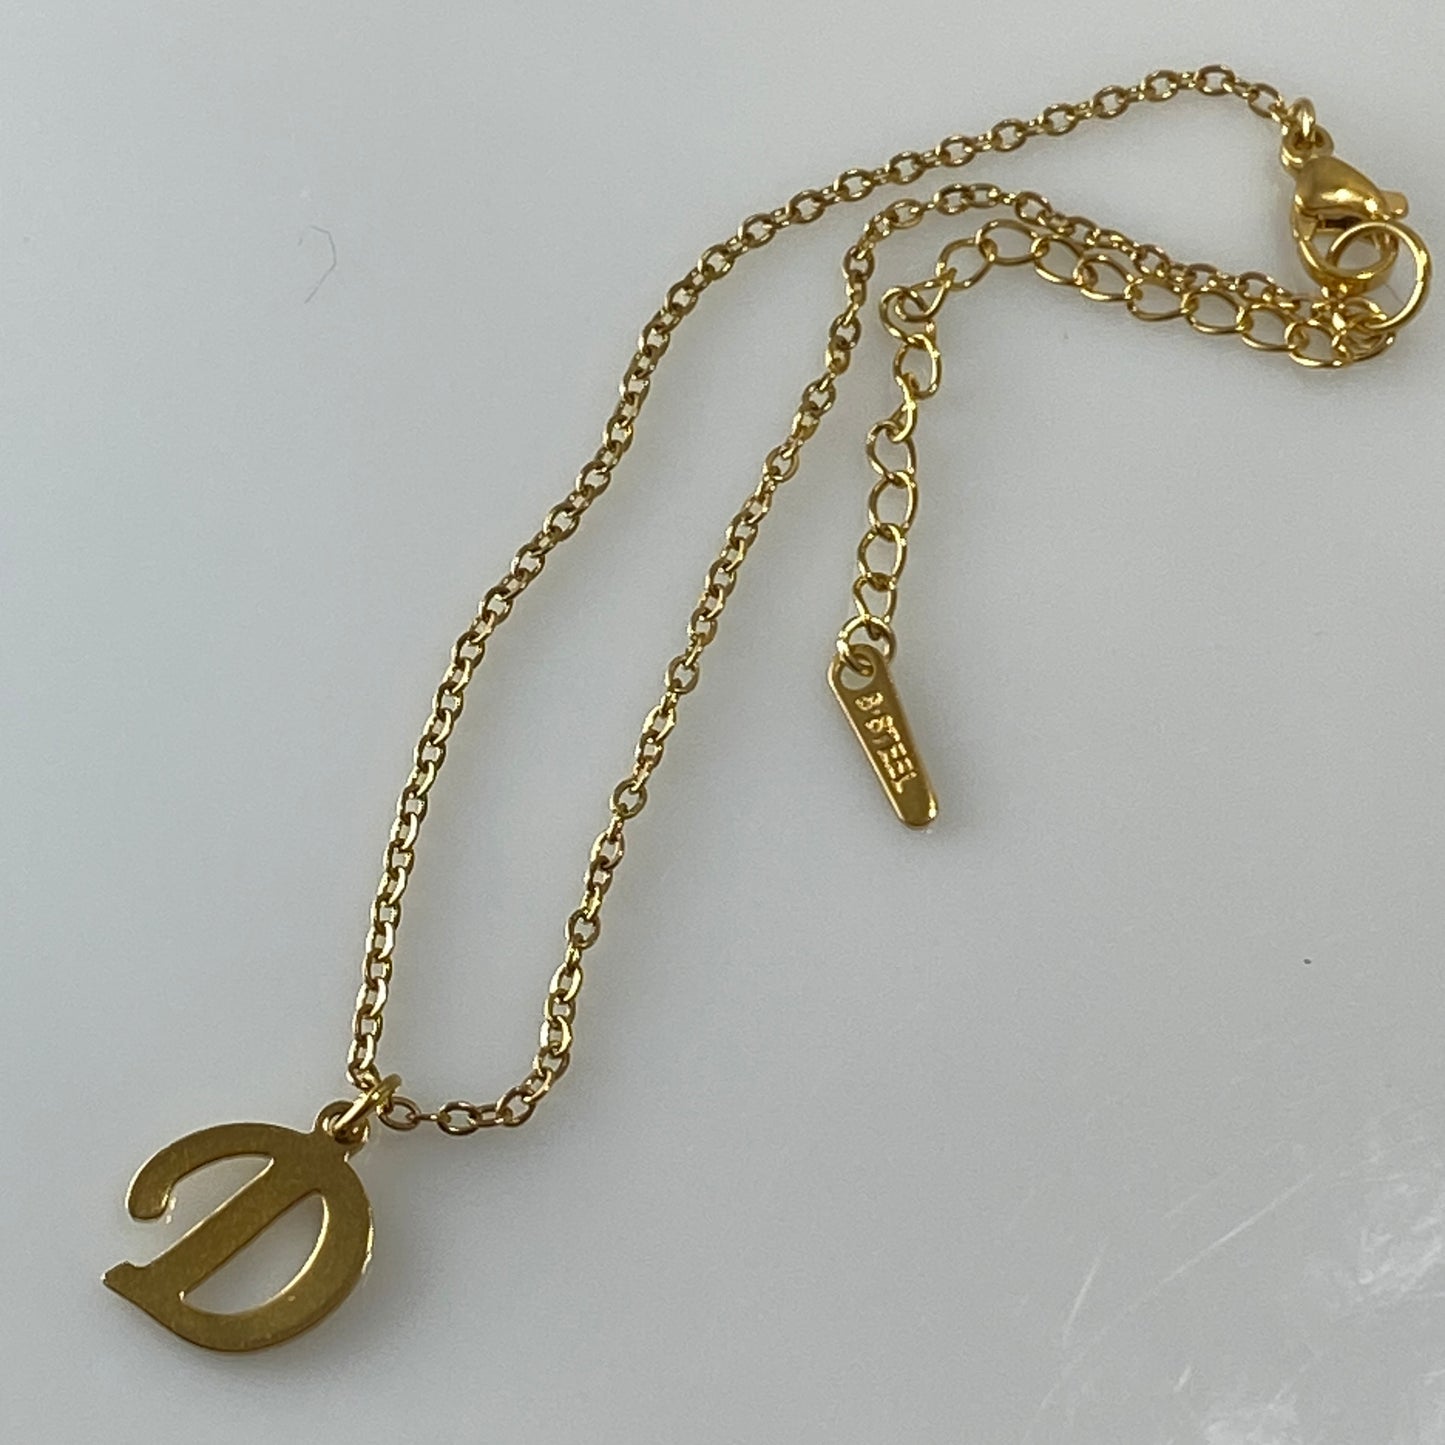 18 kt Gold Plated Stainless Steel Letter Initial Bracelet or Anklet or Necklace